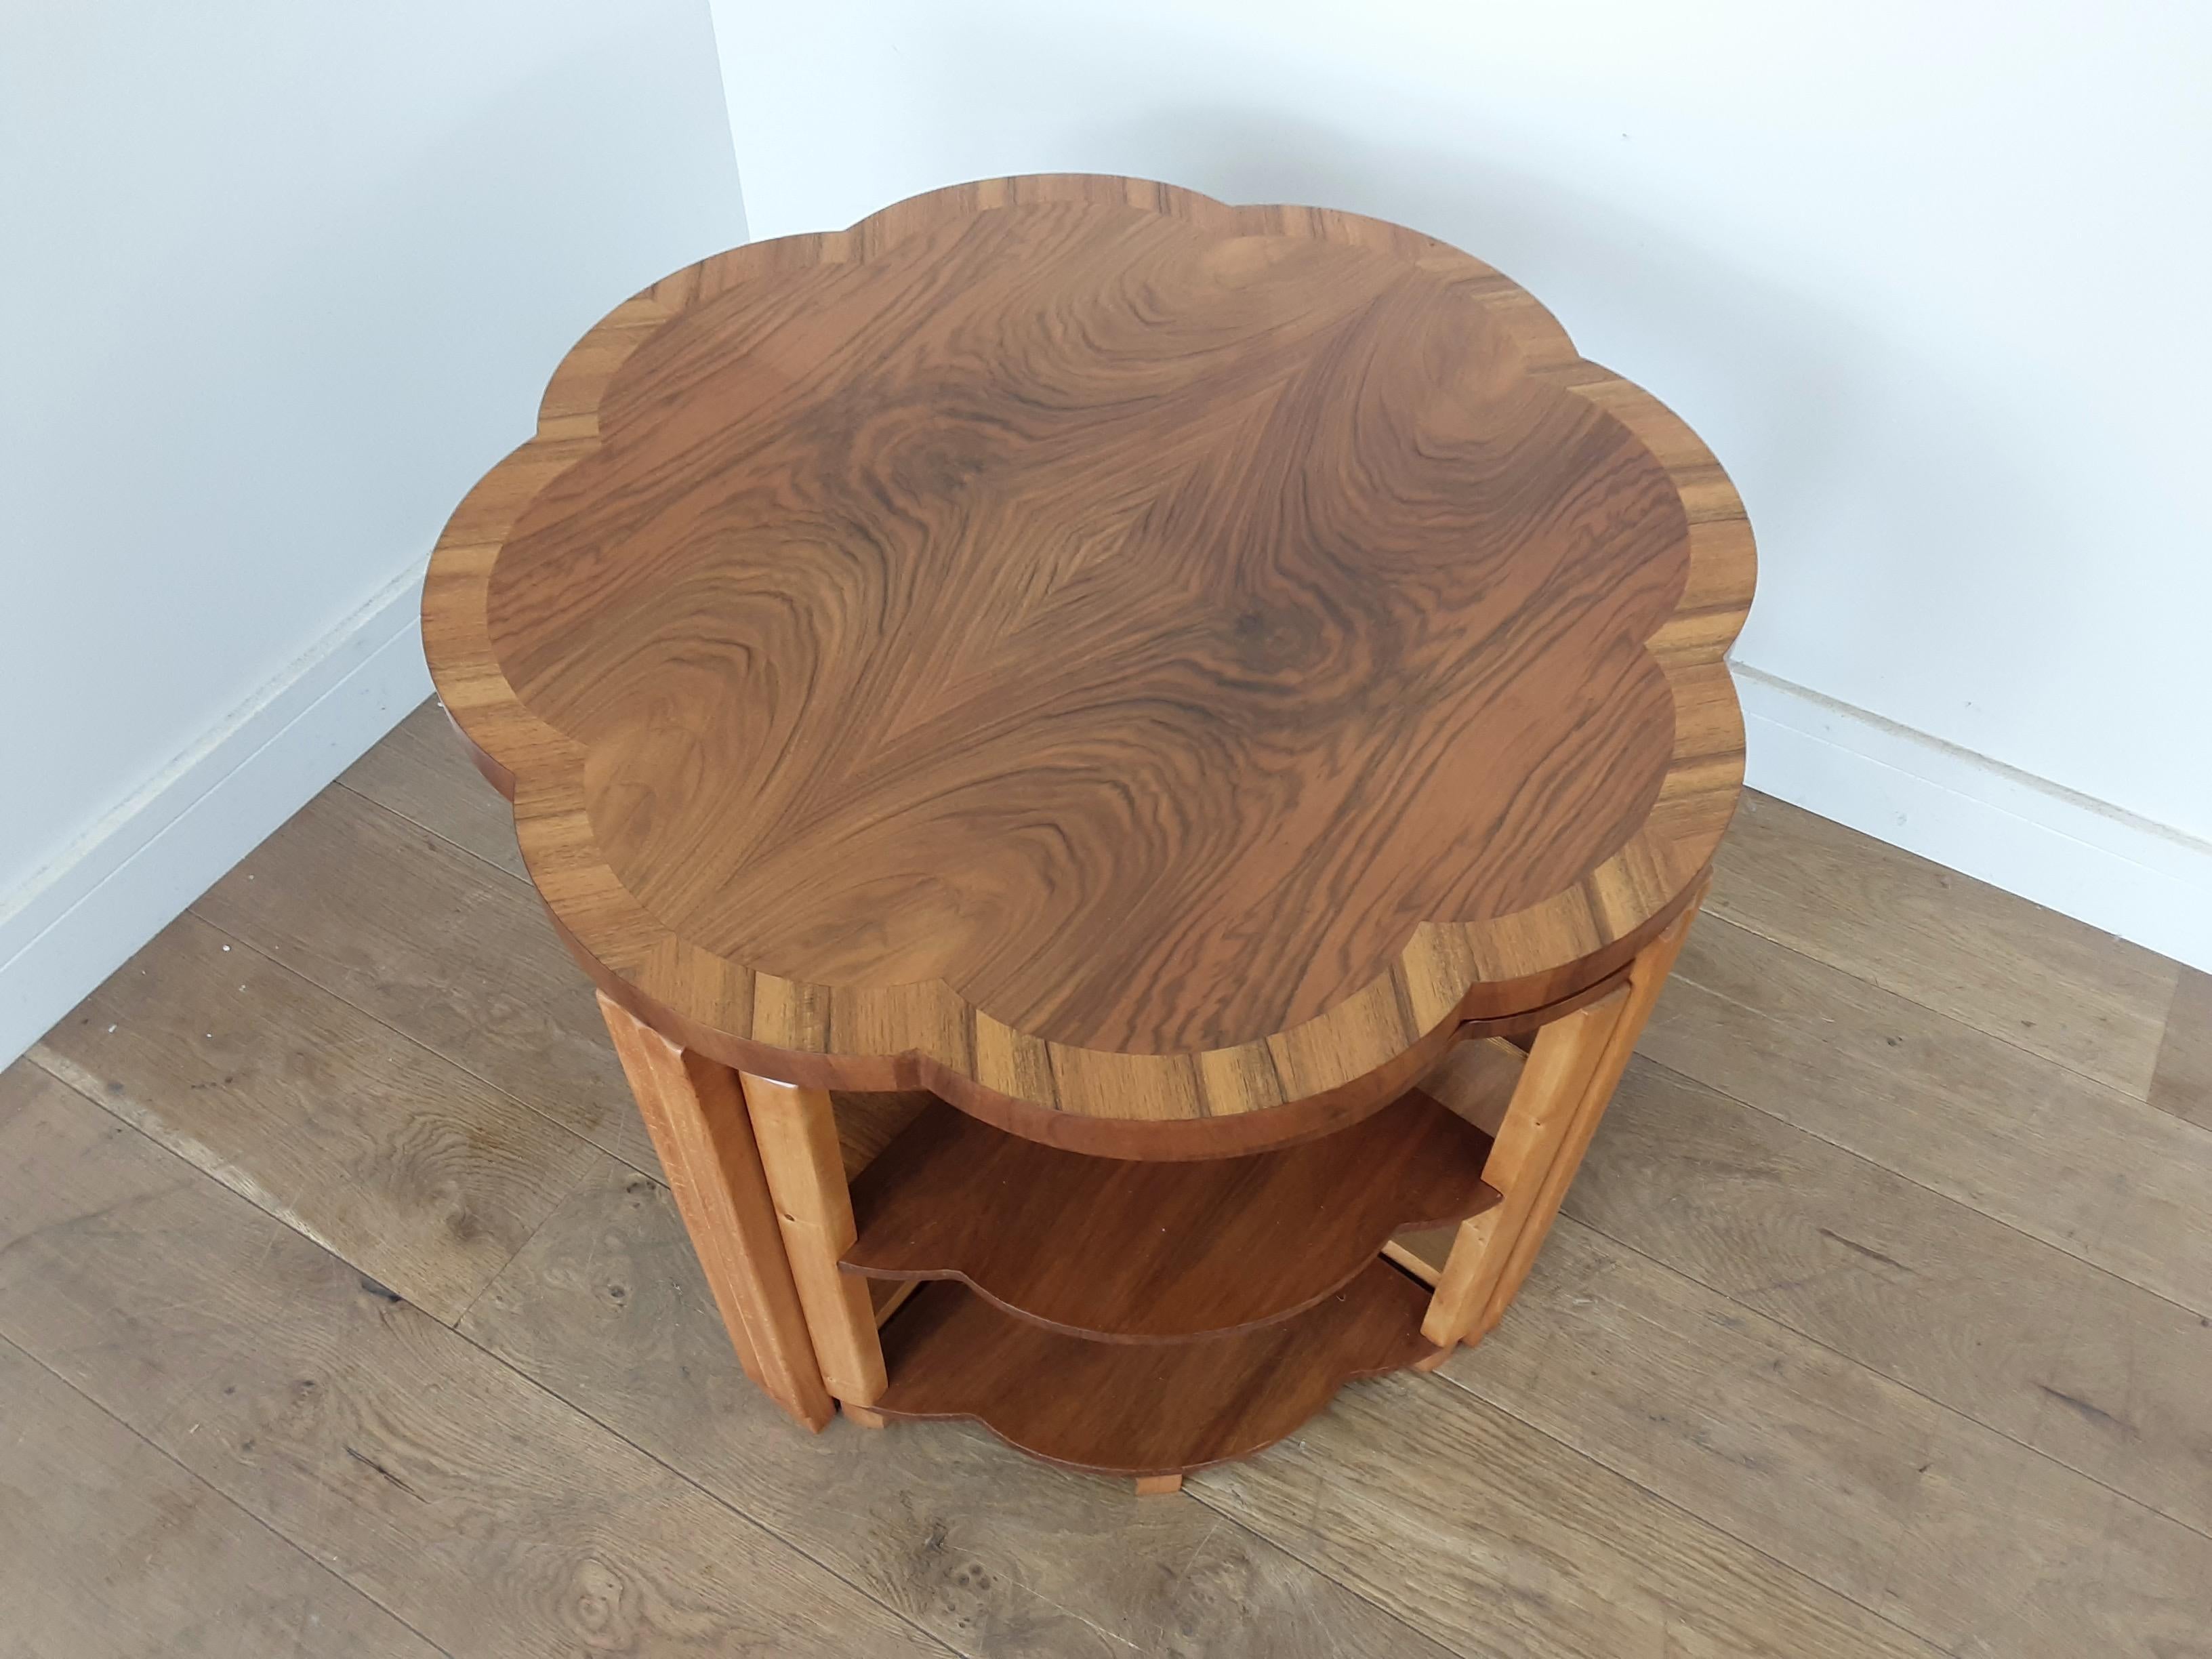 Art Deco quartet nest of tables.
Beautiful butterfly walnut table with a scalloped edge and four side tables which sit neatly underneath.
A Classic design by harry and Lou Epstein.
Measures: 56 cm height, 74 cm diameter, each side table is 50 cm